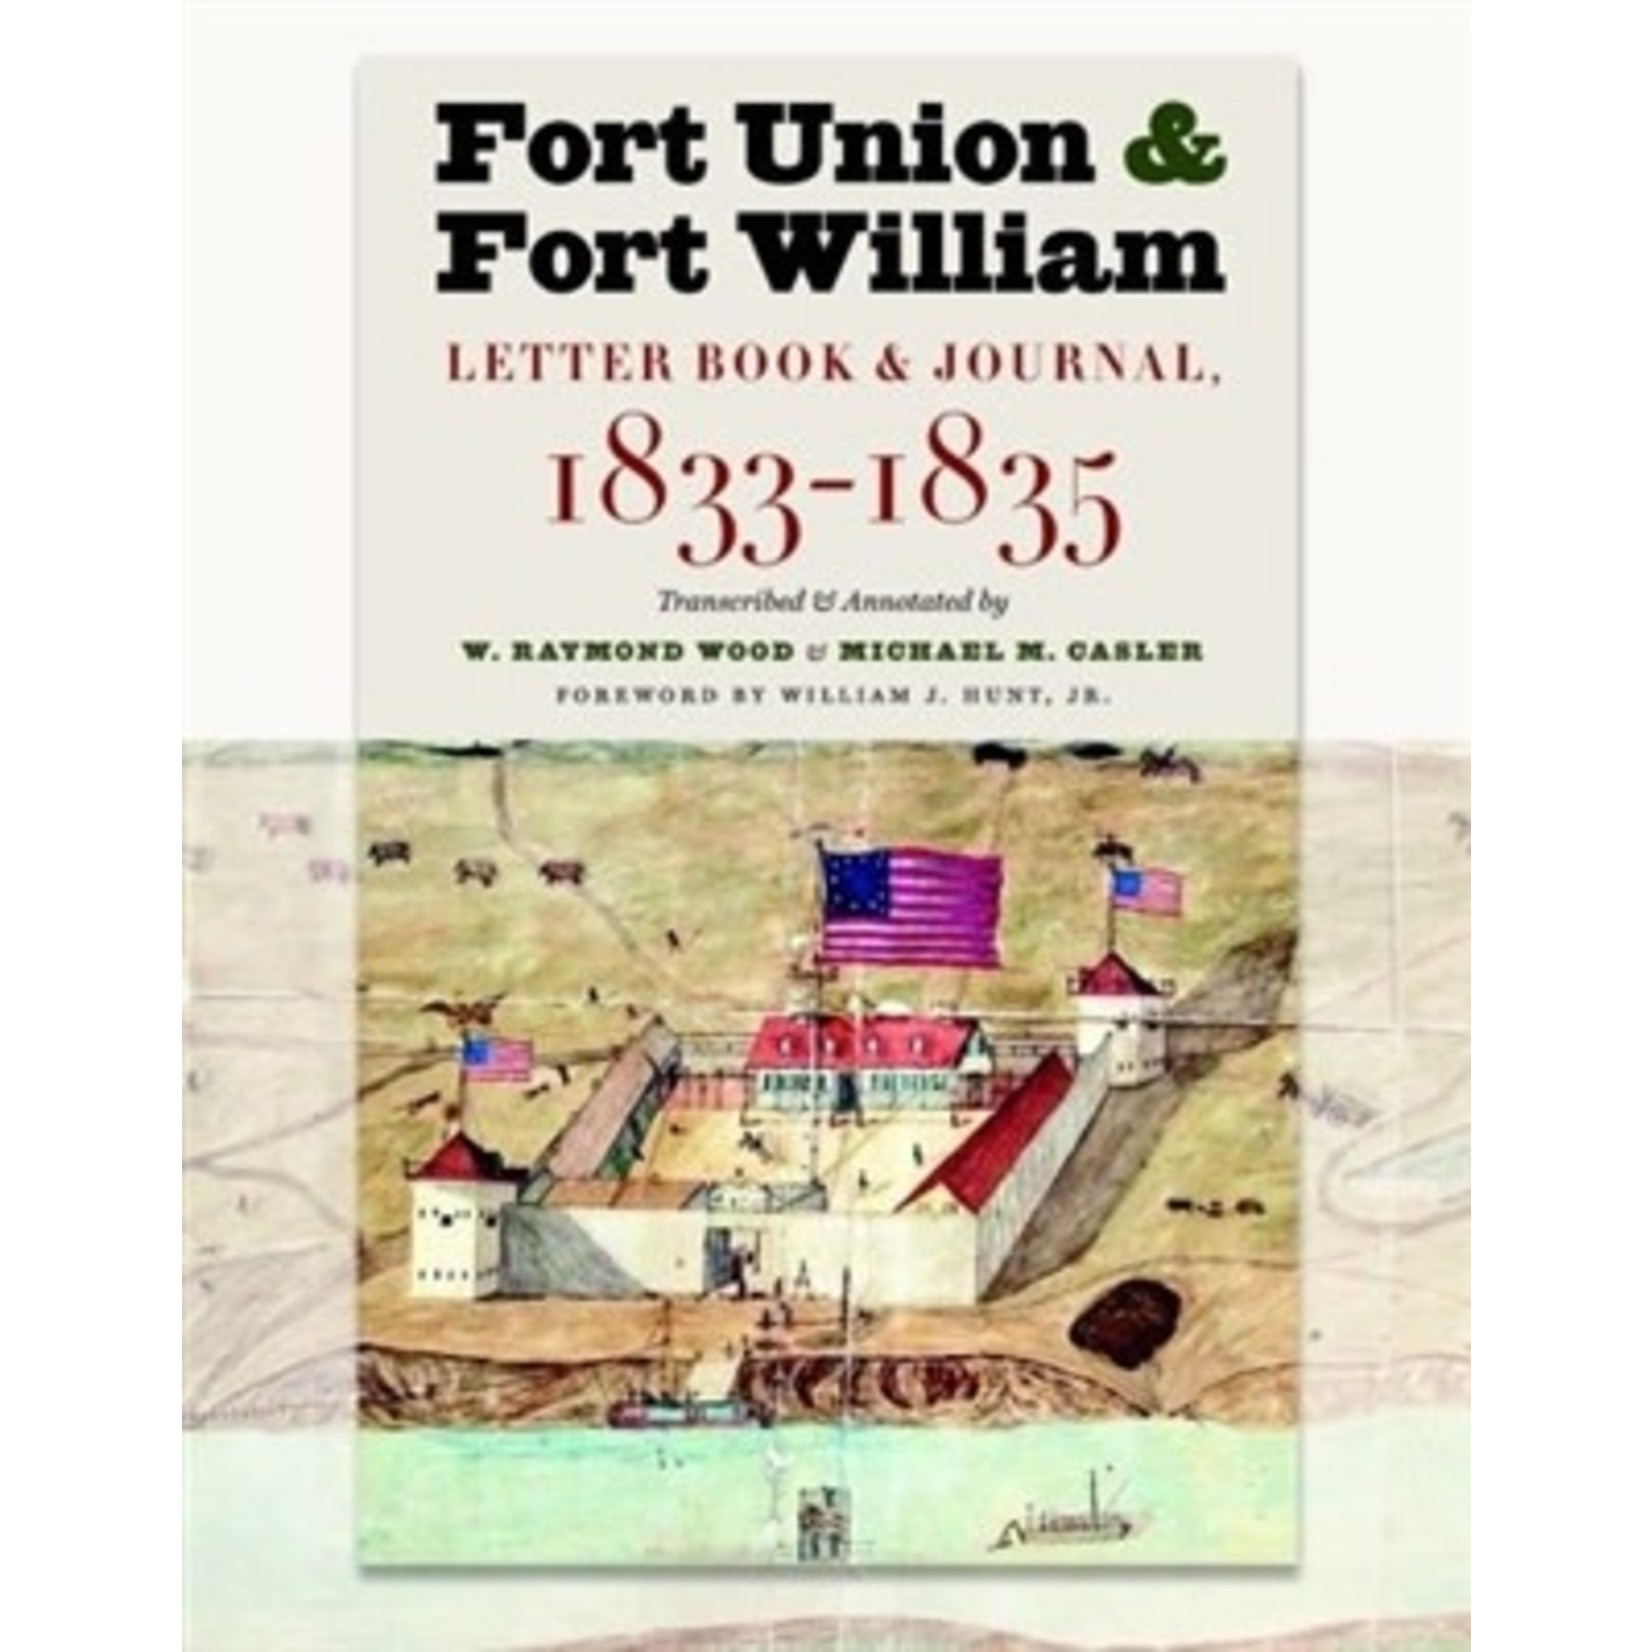 Fort Union & Fort William: Letter book & Journal, 1833-1835